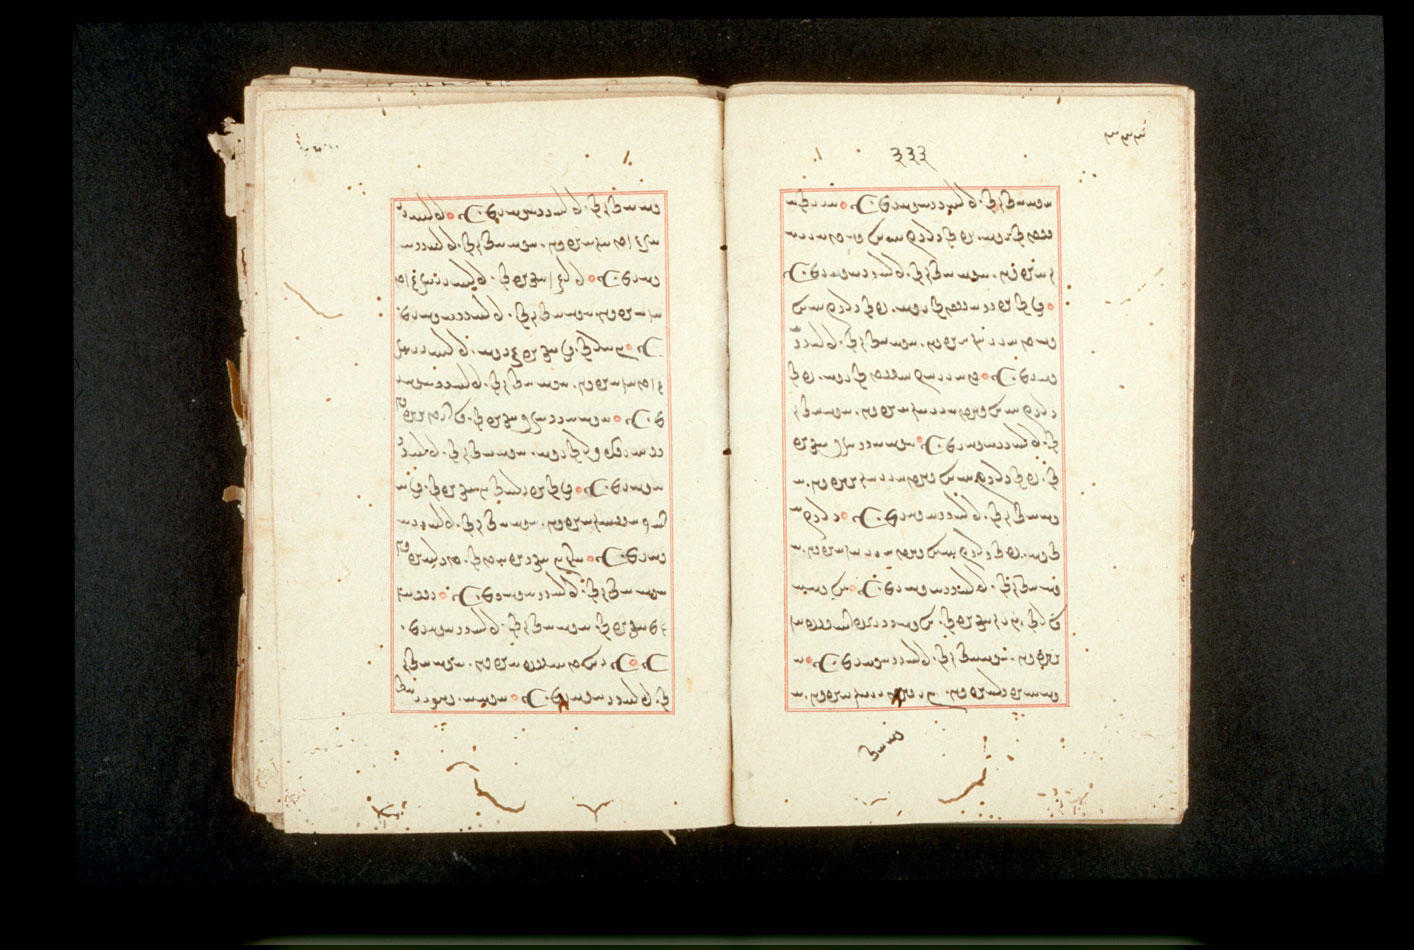 Folios 333v (right) and 334r (left)